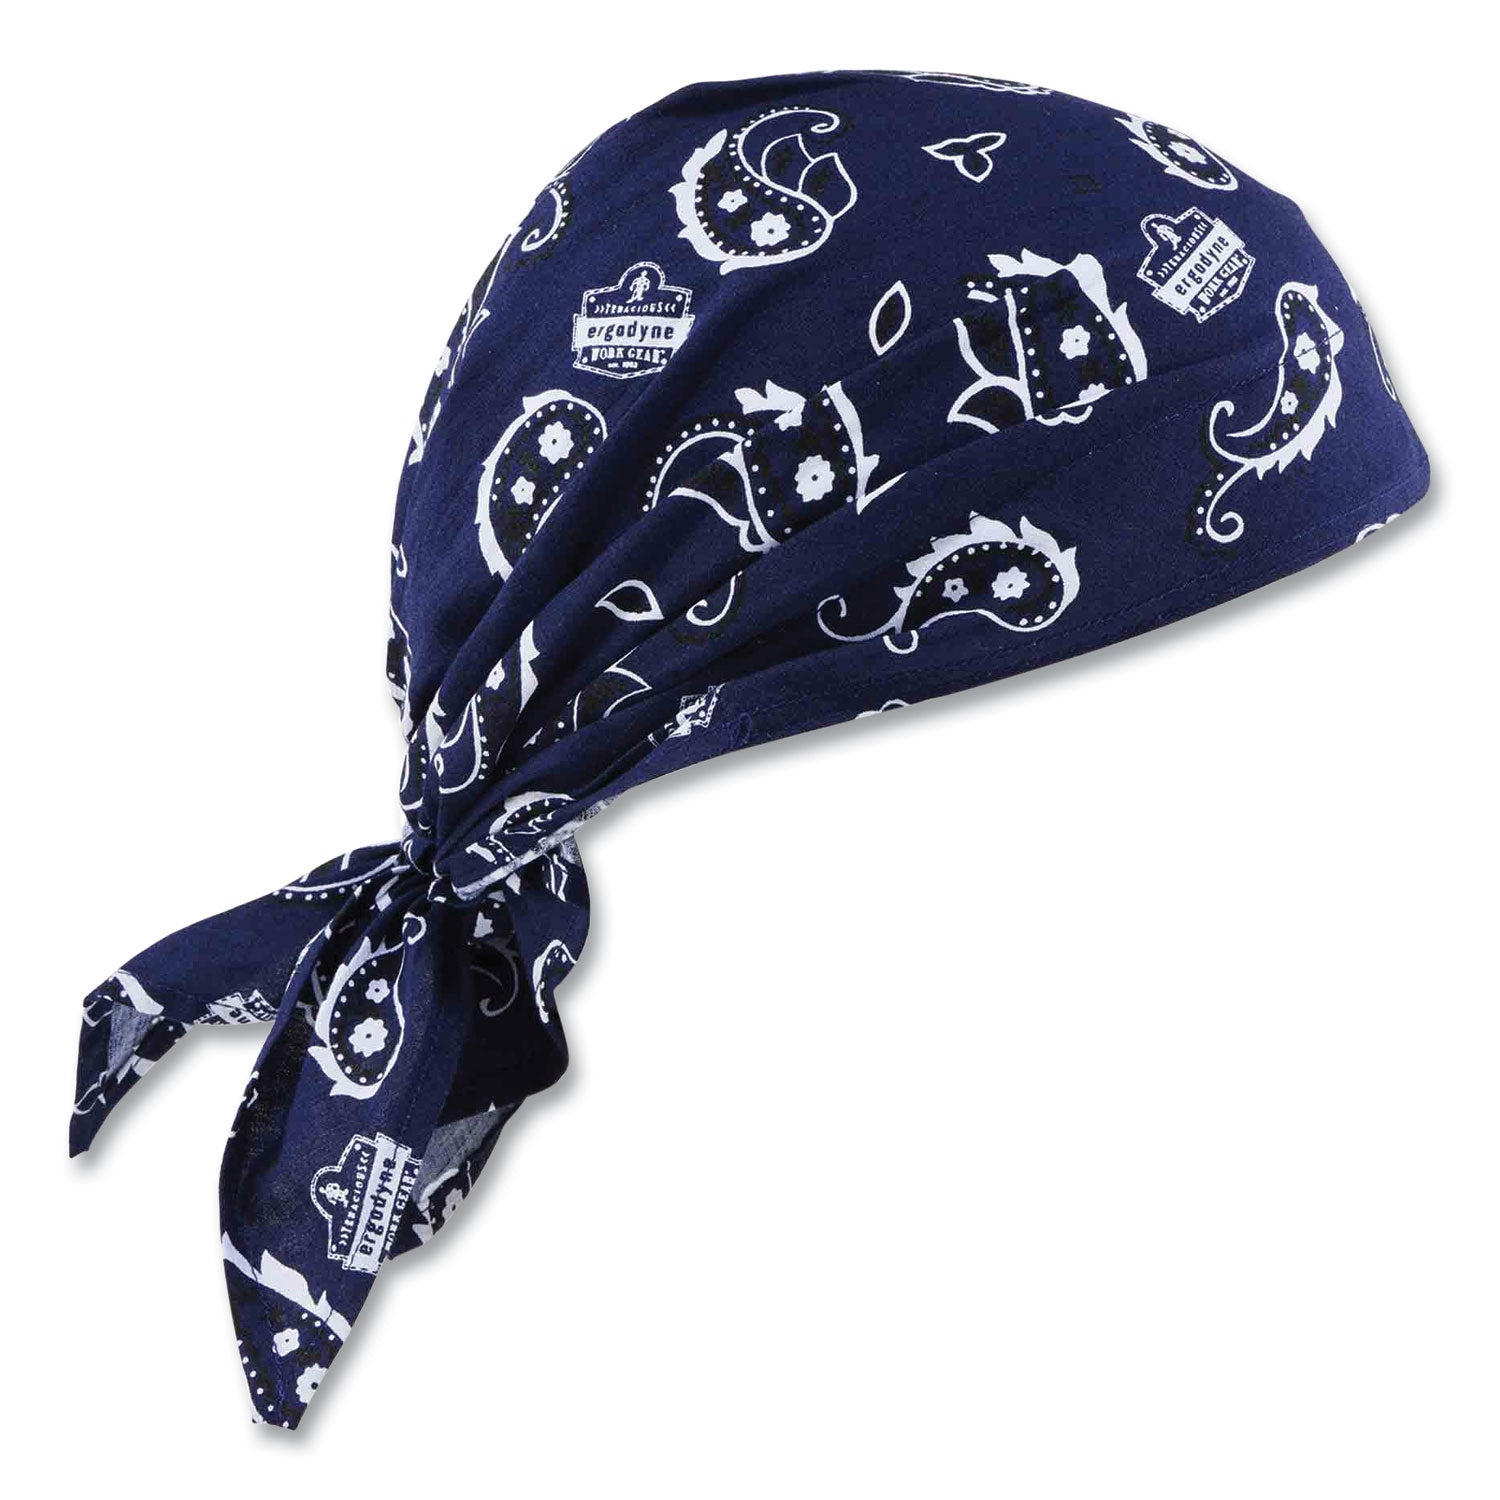 chill-its-6710-cooling-embedded-polymers-tie-bandana-triangle-hat-one-size-fit-most-navy-westrn-ships-in-1-3-business-days_ego12326 - 1